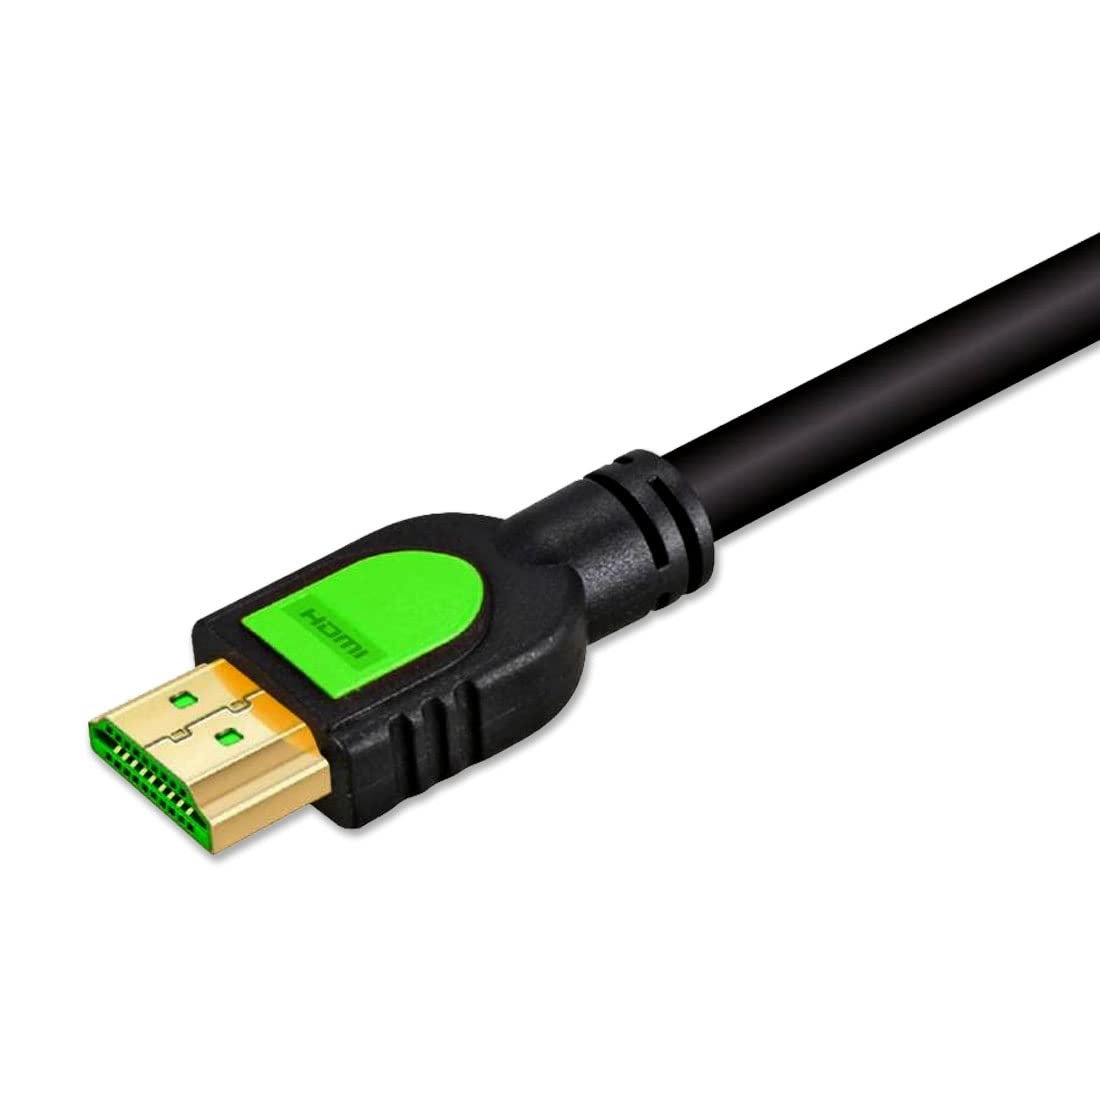 MX HDMI Cable 2.0 V 10 Meter 19pin Supports 4K@60MHz, 2160p, 1080p & 3D & Audio Return for TV, Laptop, PC, Monitor